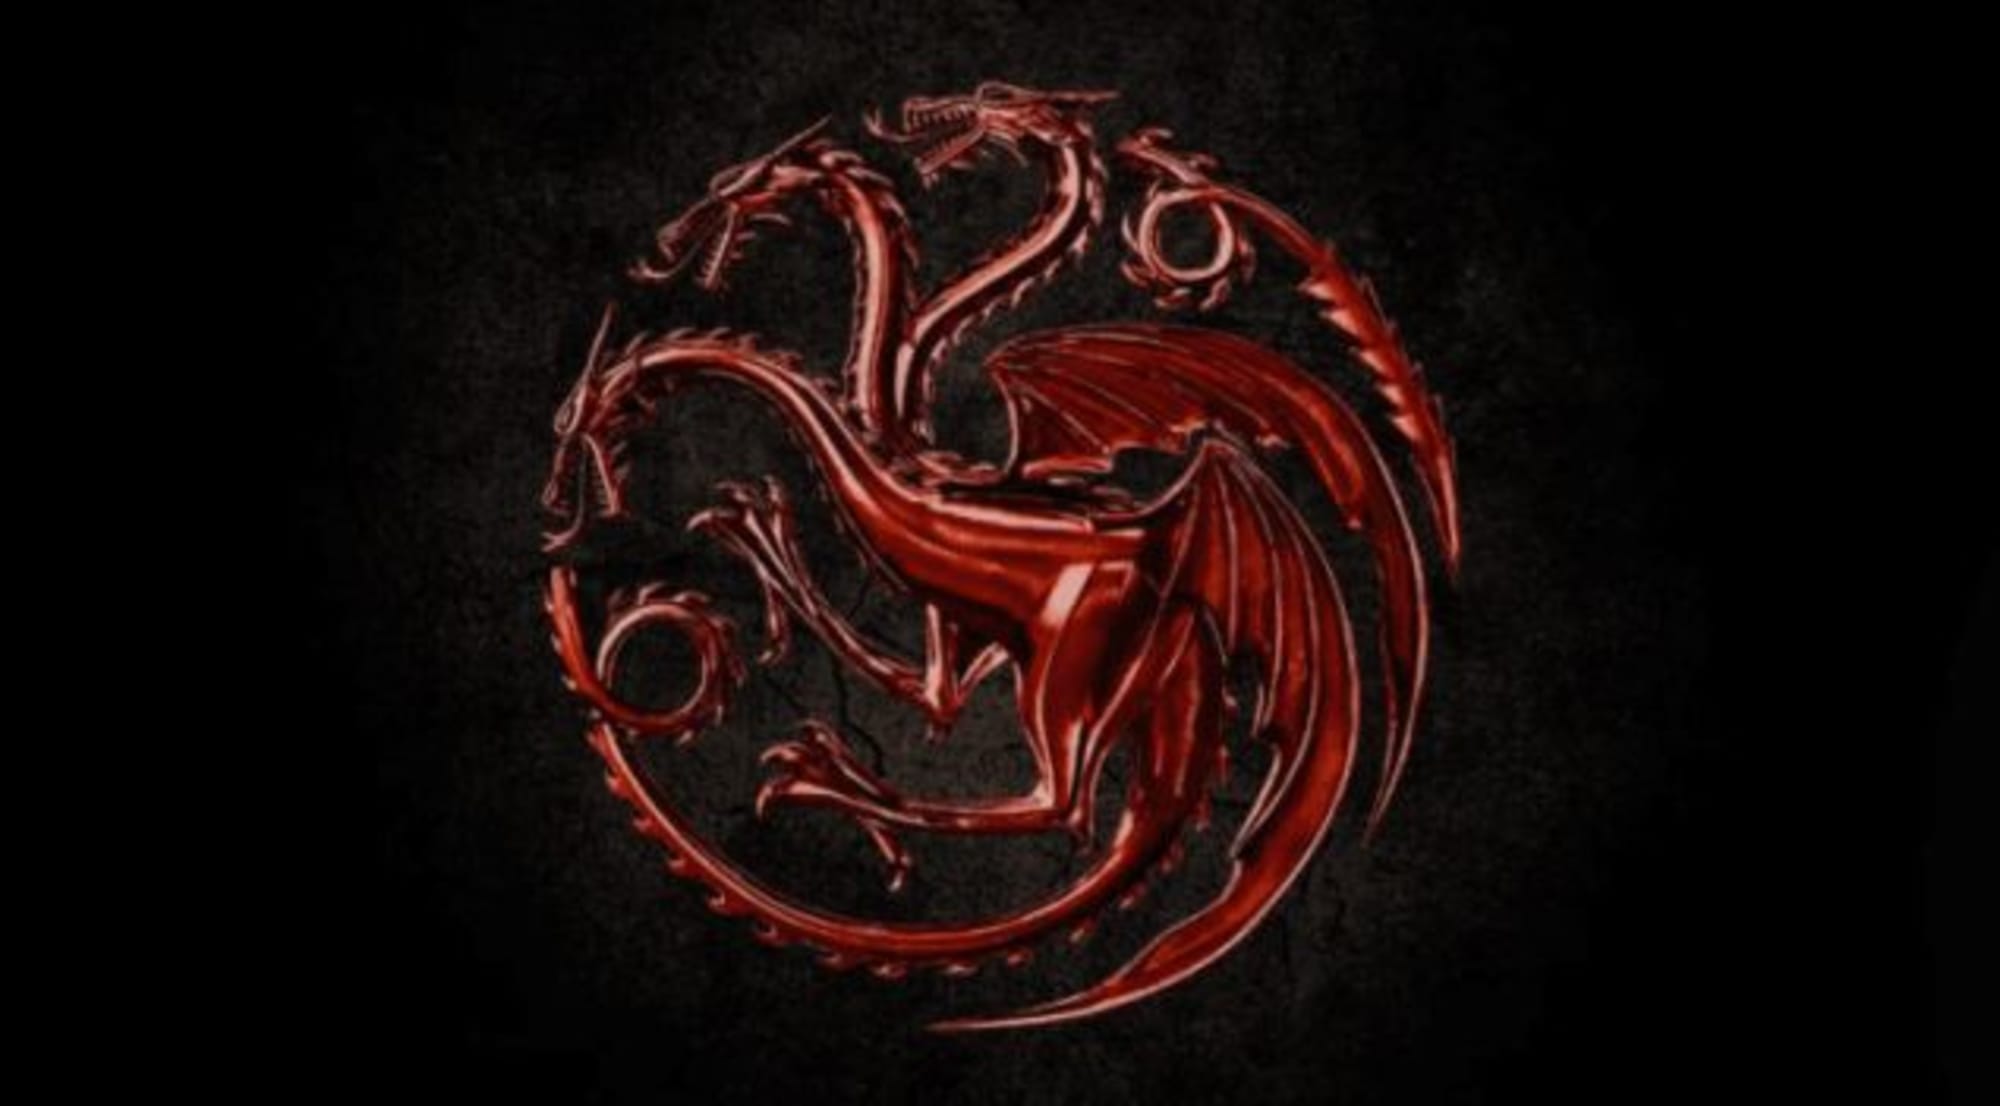 House the Dragons on X: Os personagens de House of the Dragon